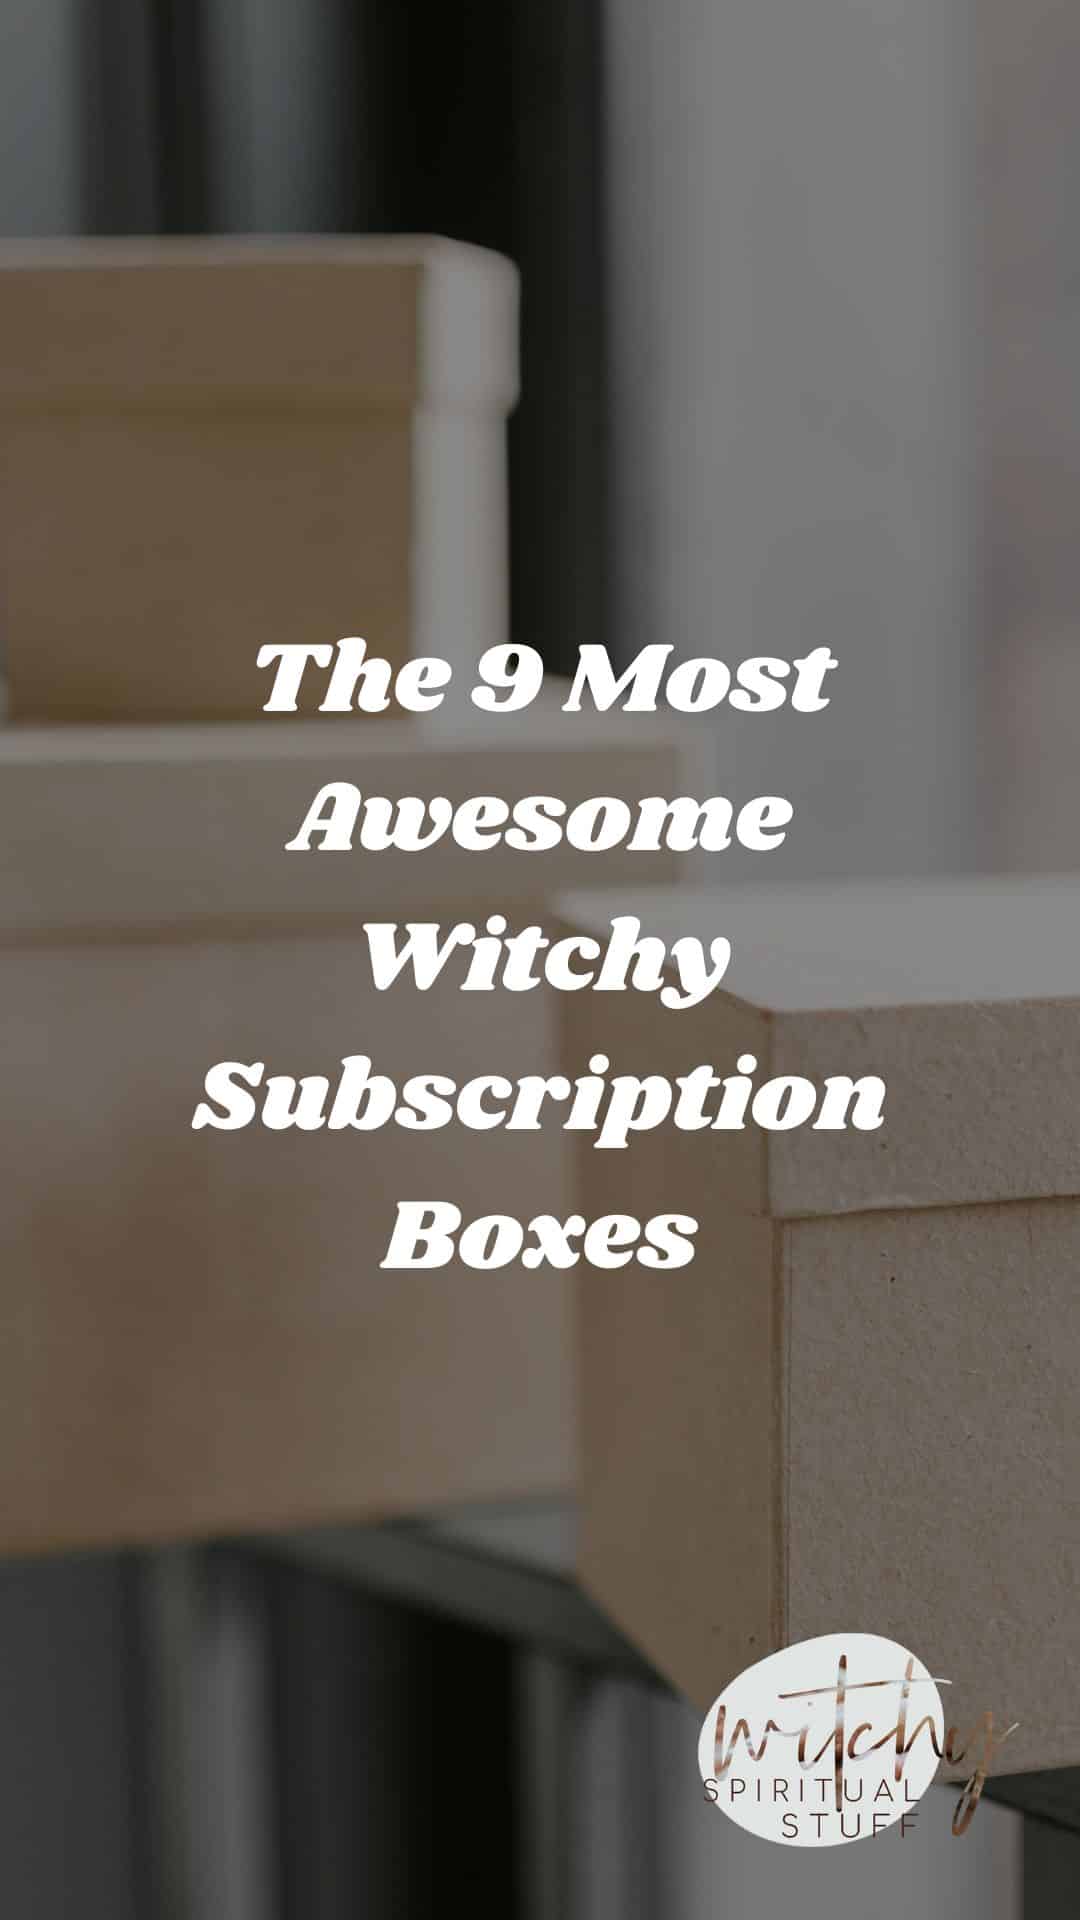 The 9 Most Awesome Witchy Subscription Boxes